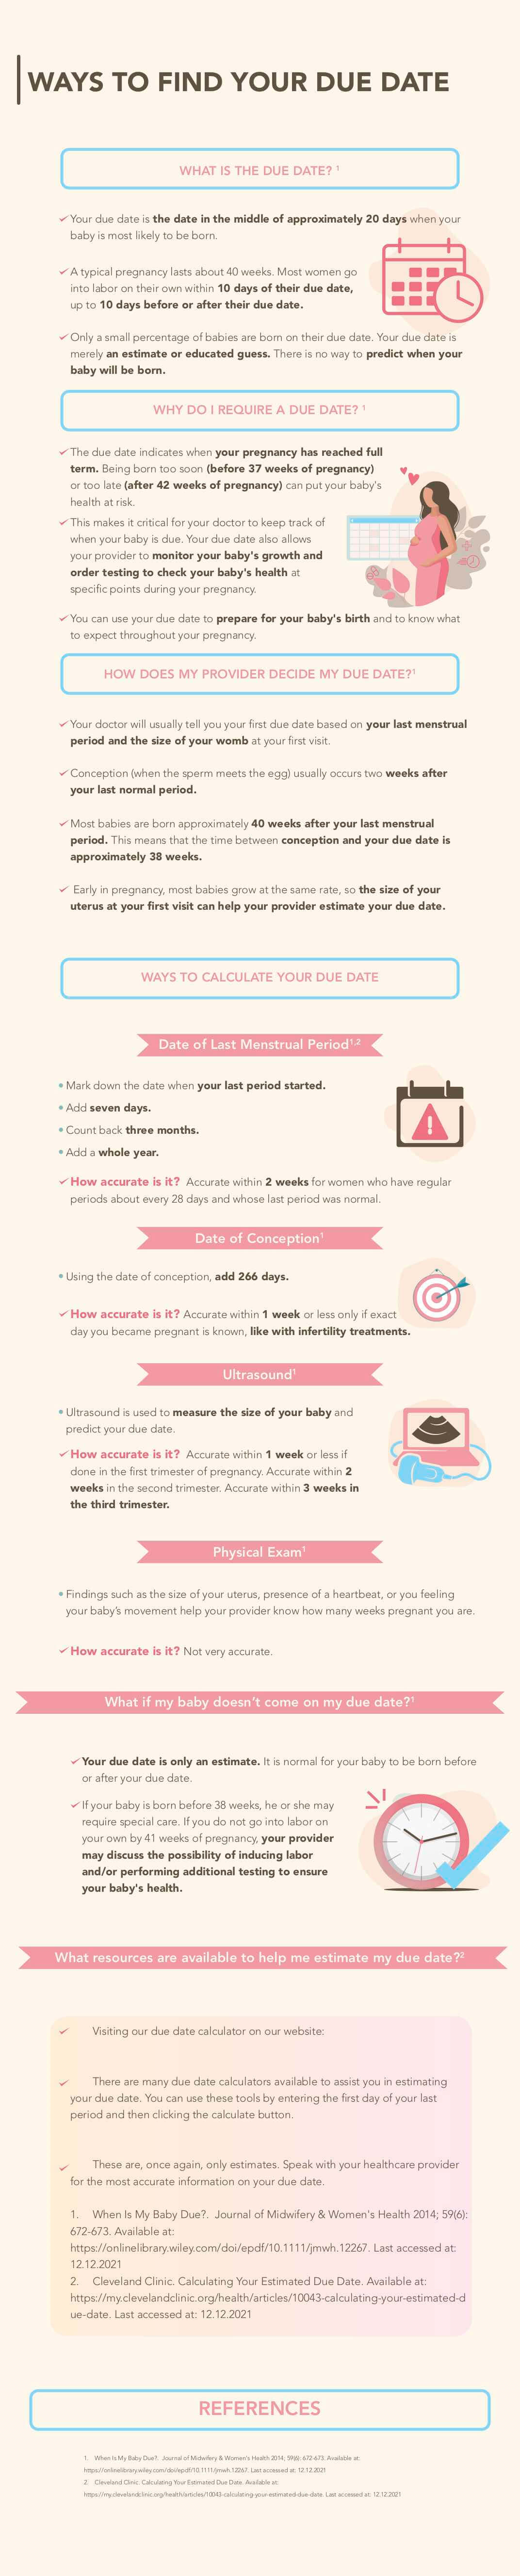 How to Find Your Pregnancy Due Date